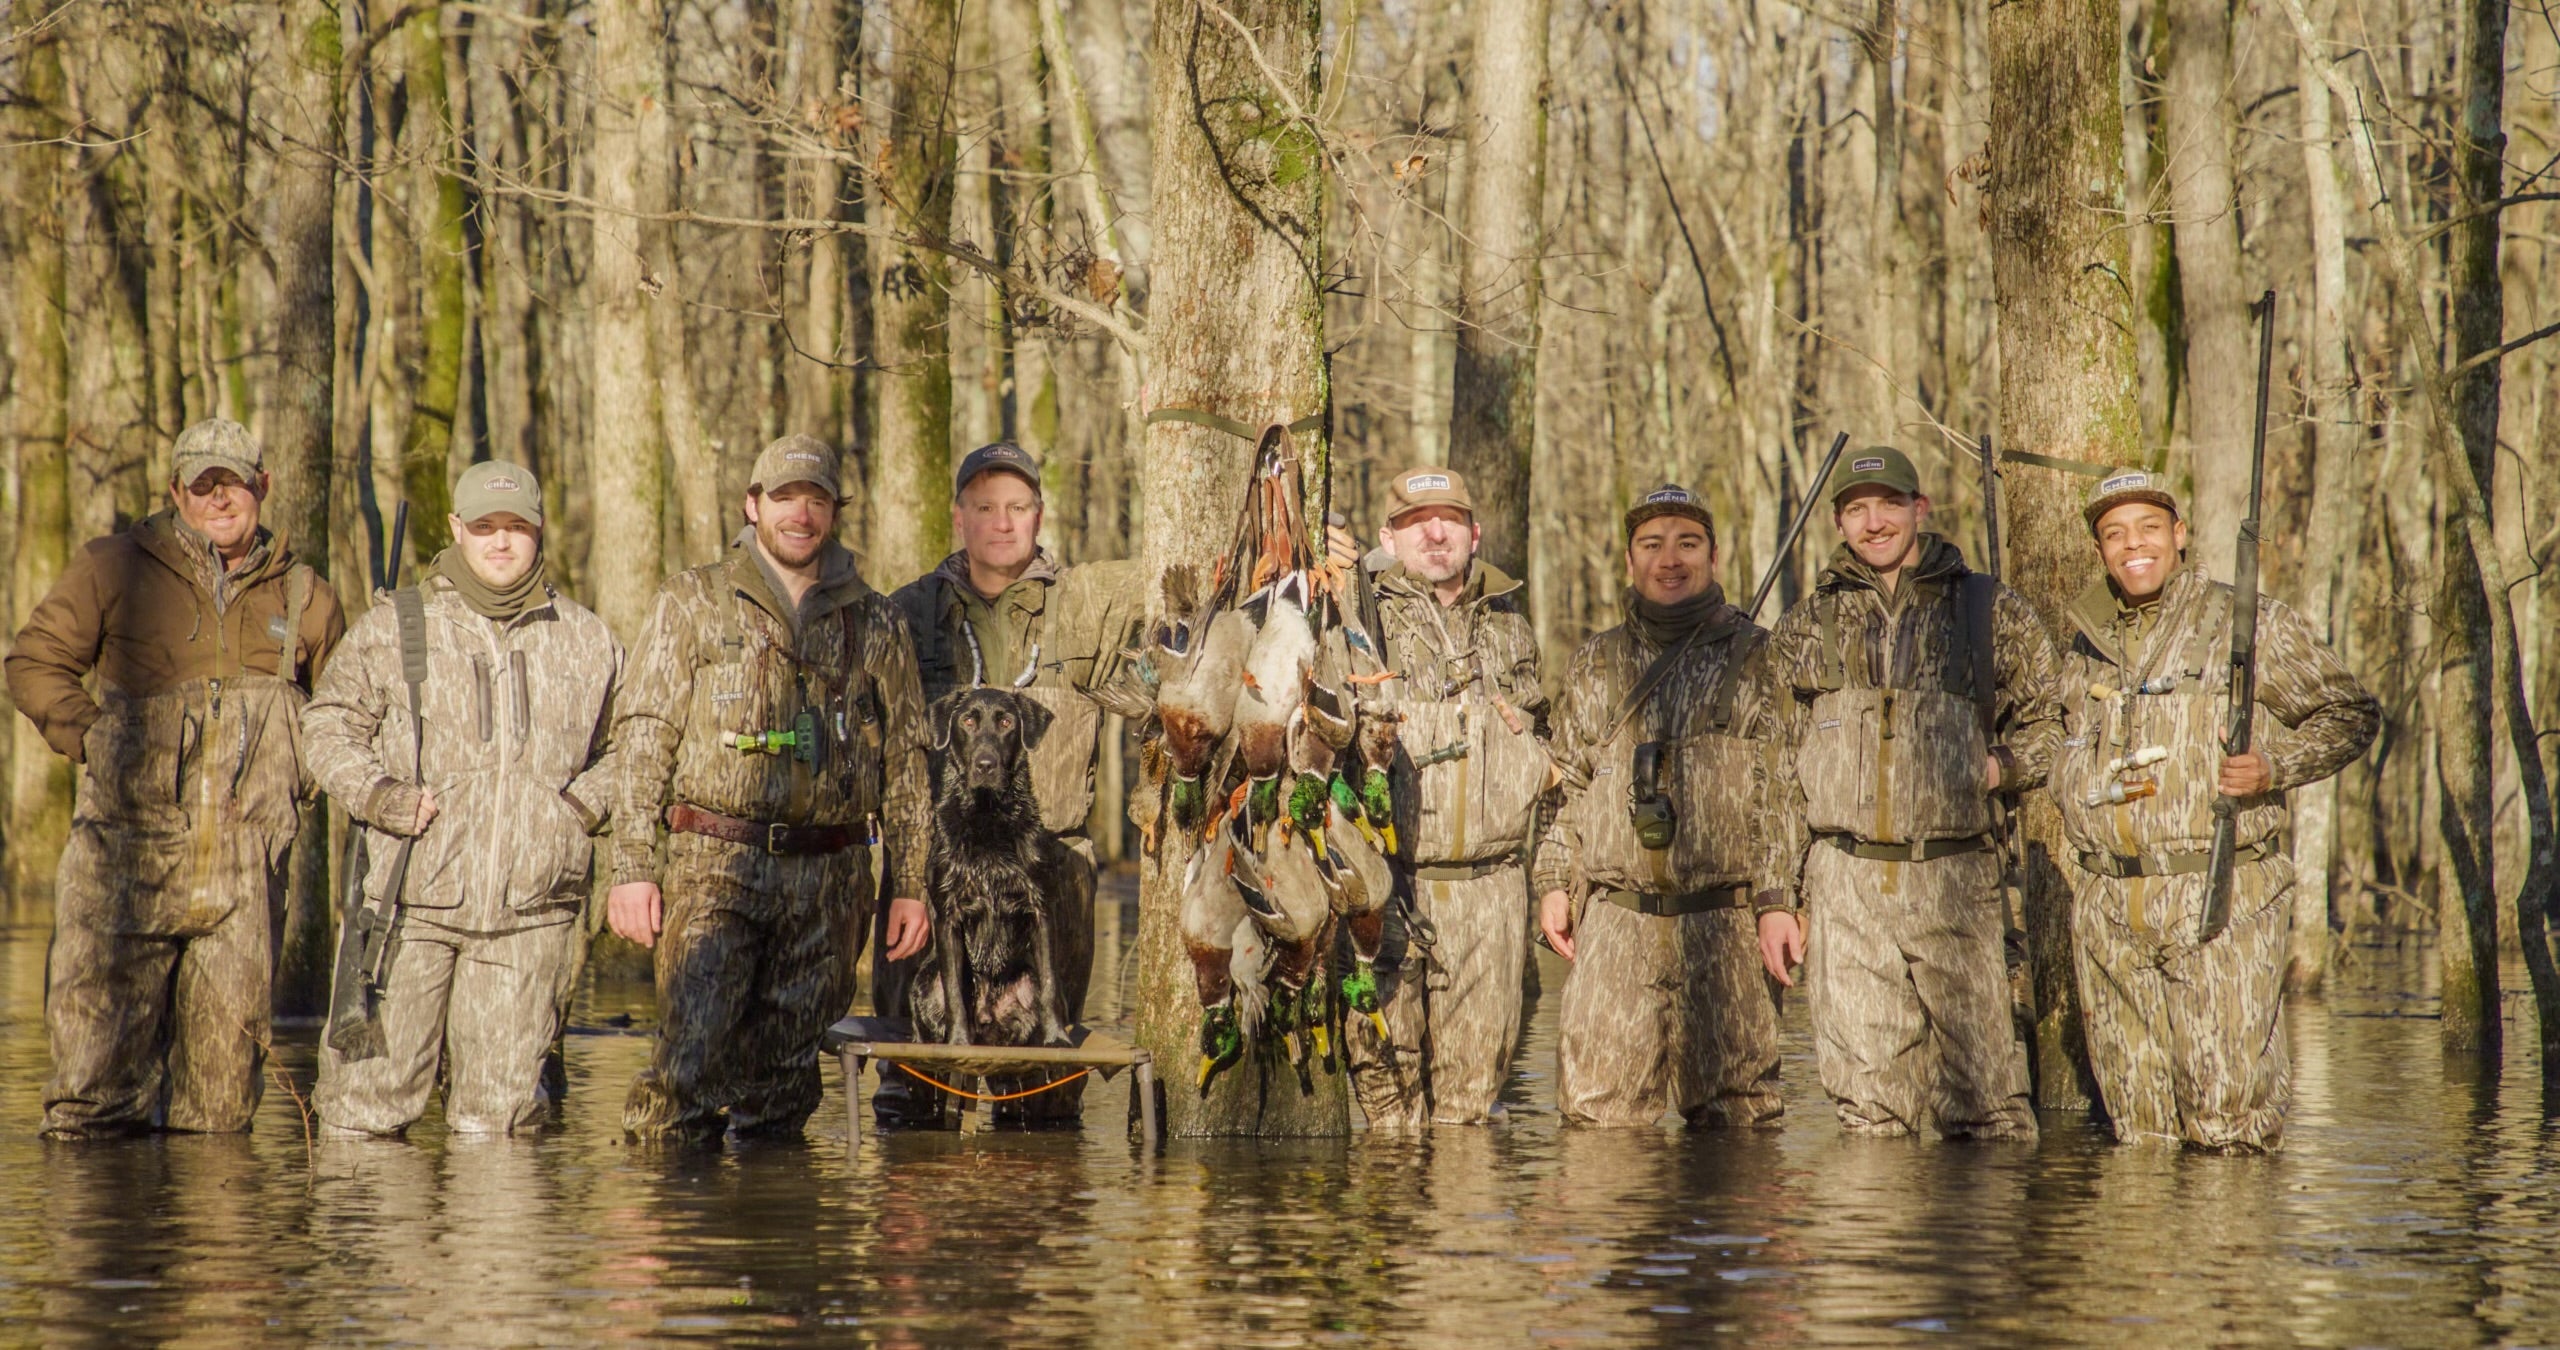 Chêne Waders Review: Are the $1,100 Waders Worth It?